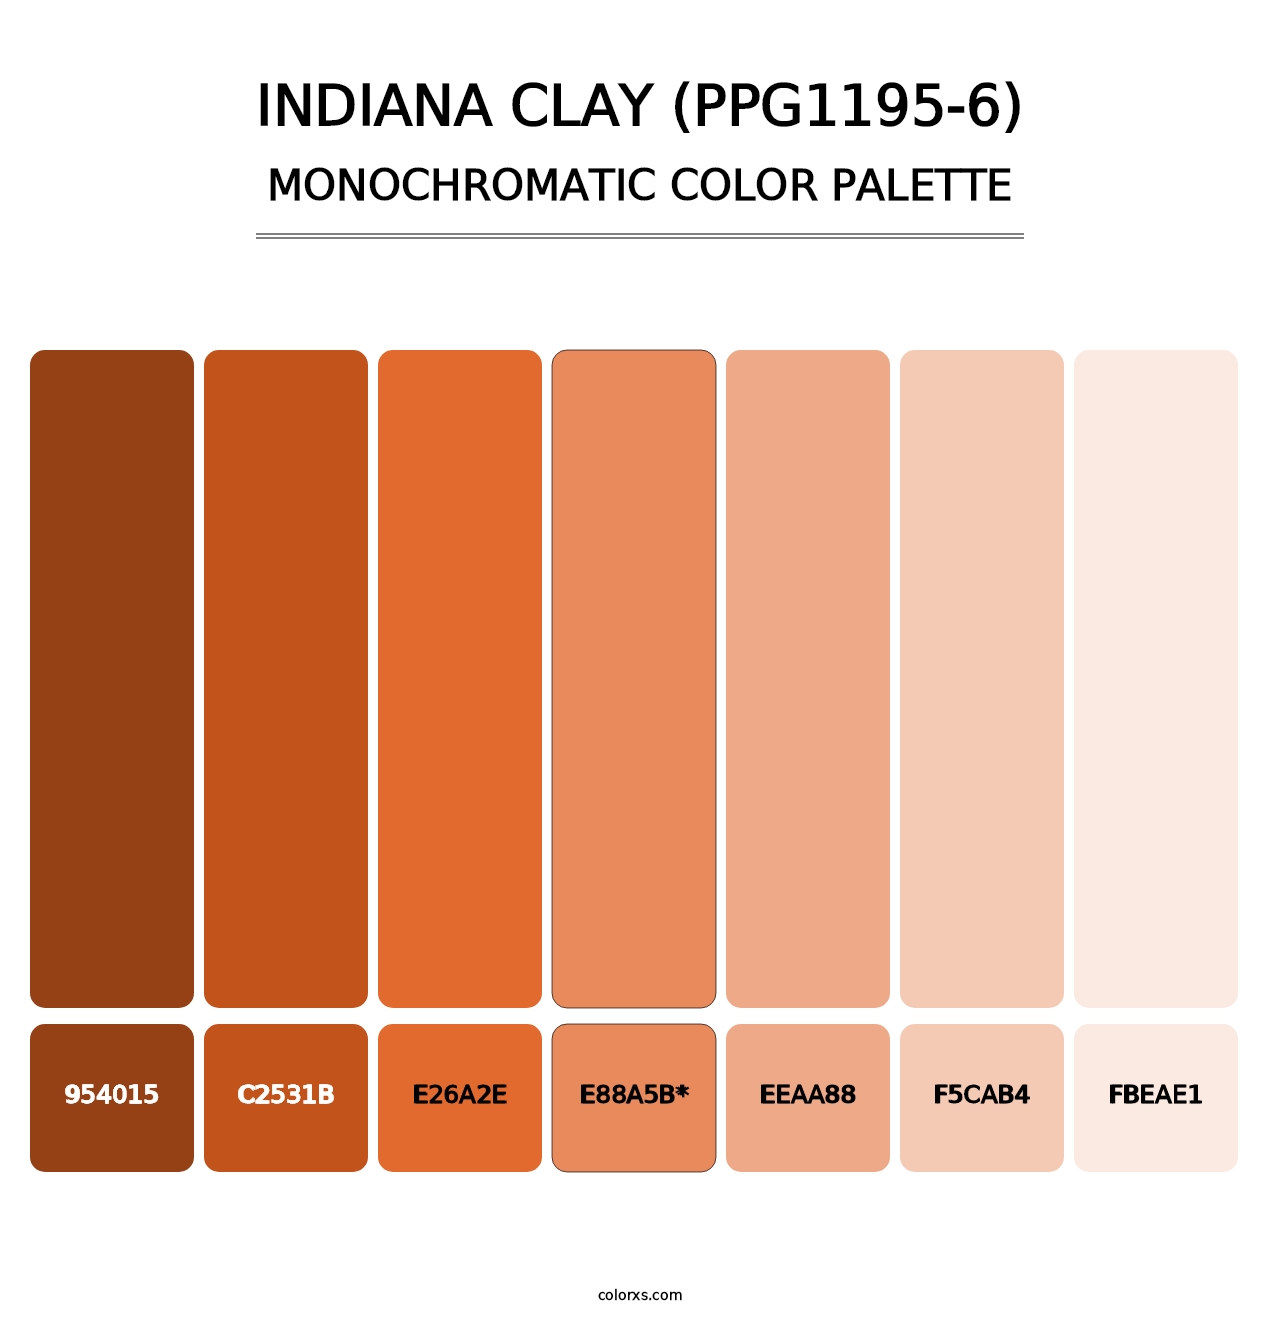 Indiana Clay (PPG1195-6) - Monochromatic Color Palette